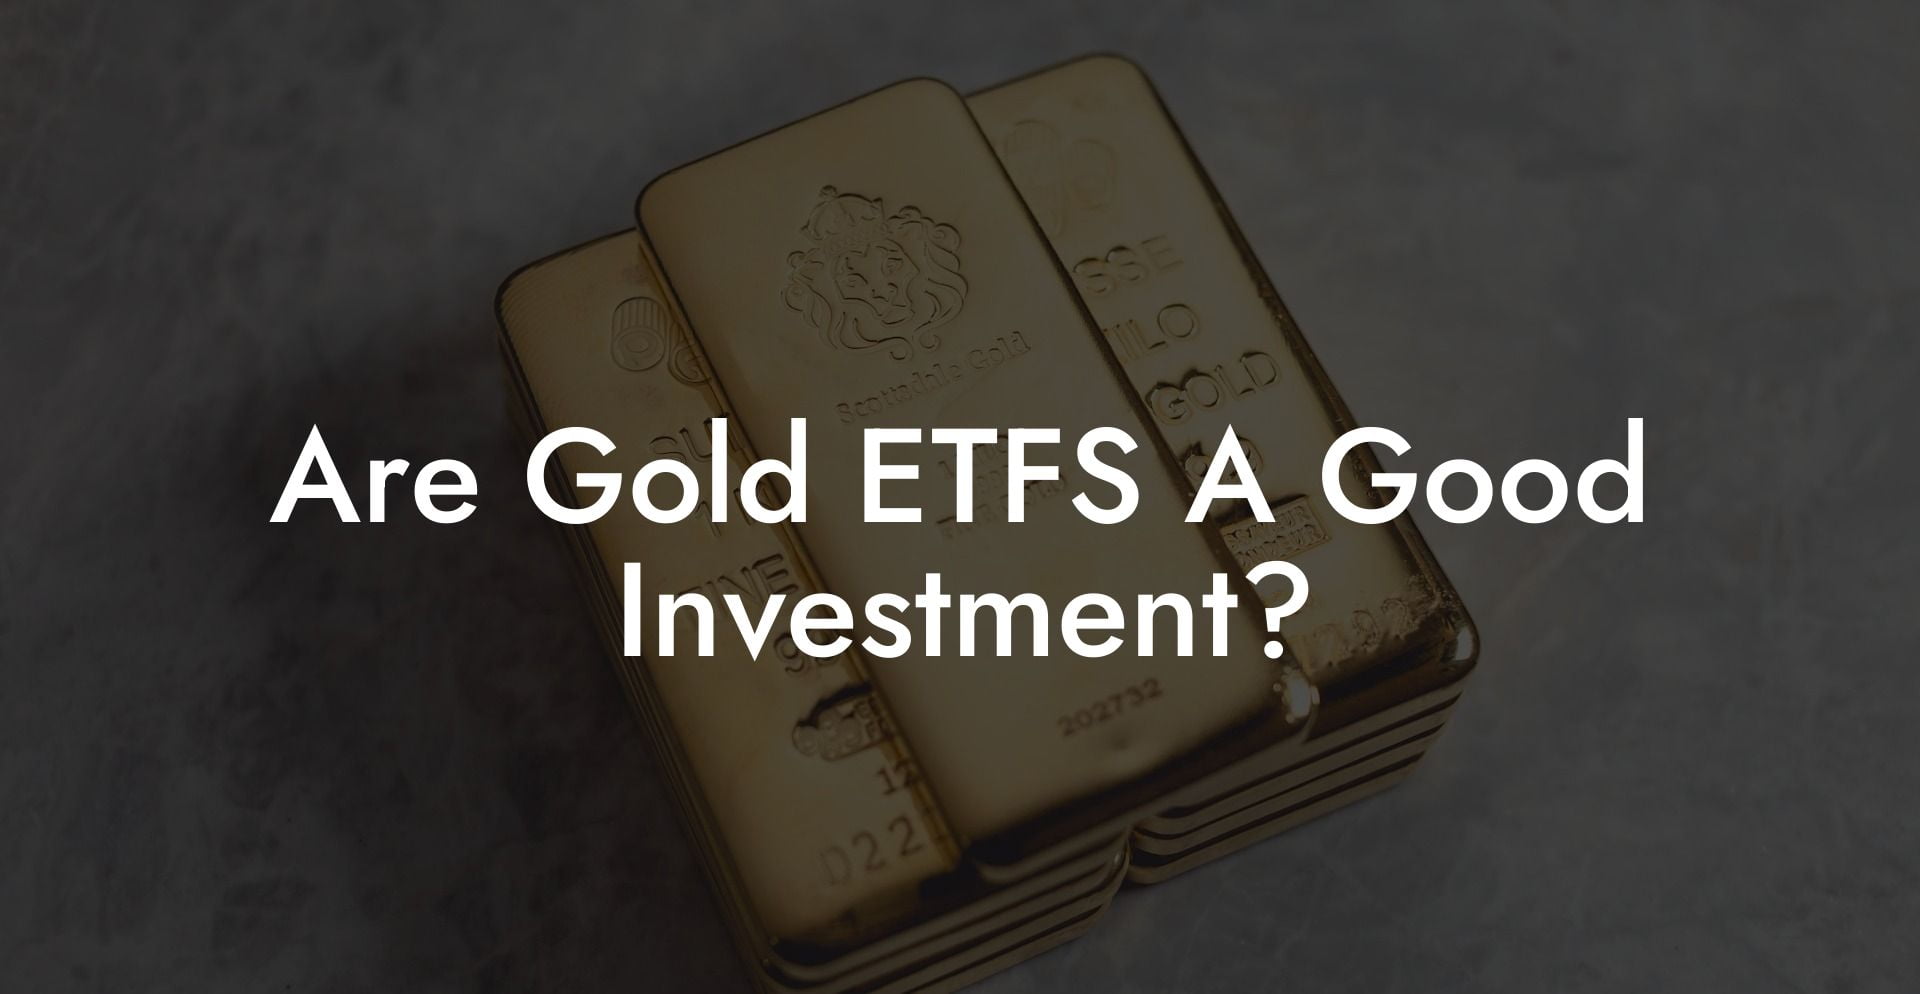 Are Gold ETFS A Good Investment?